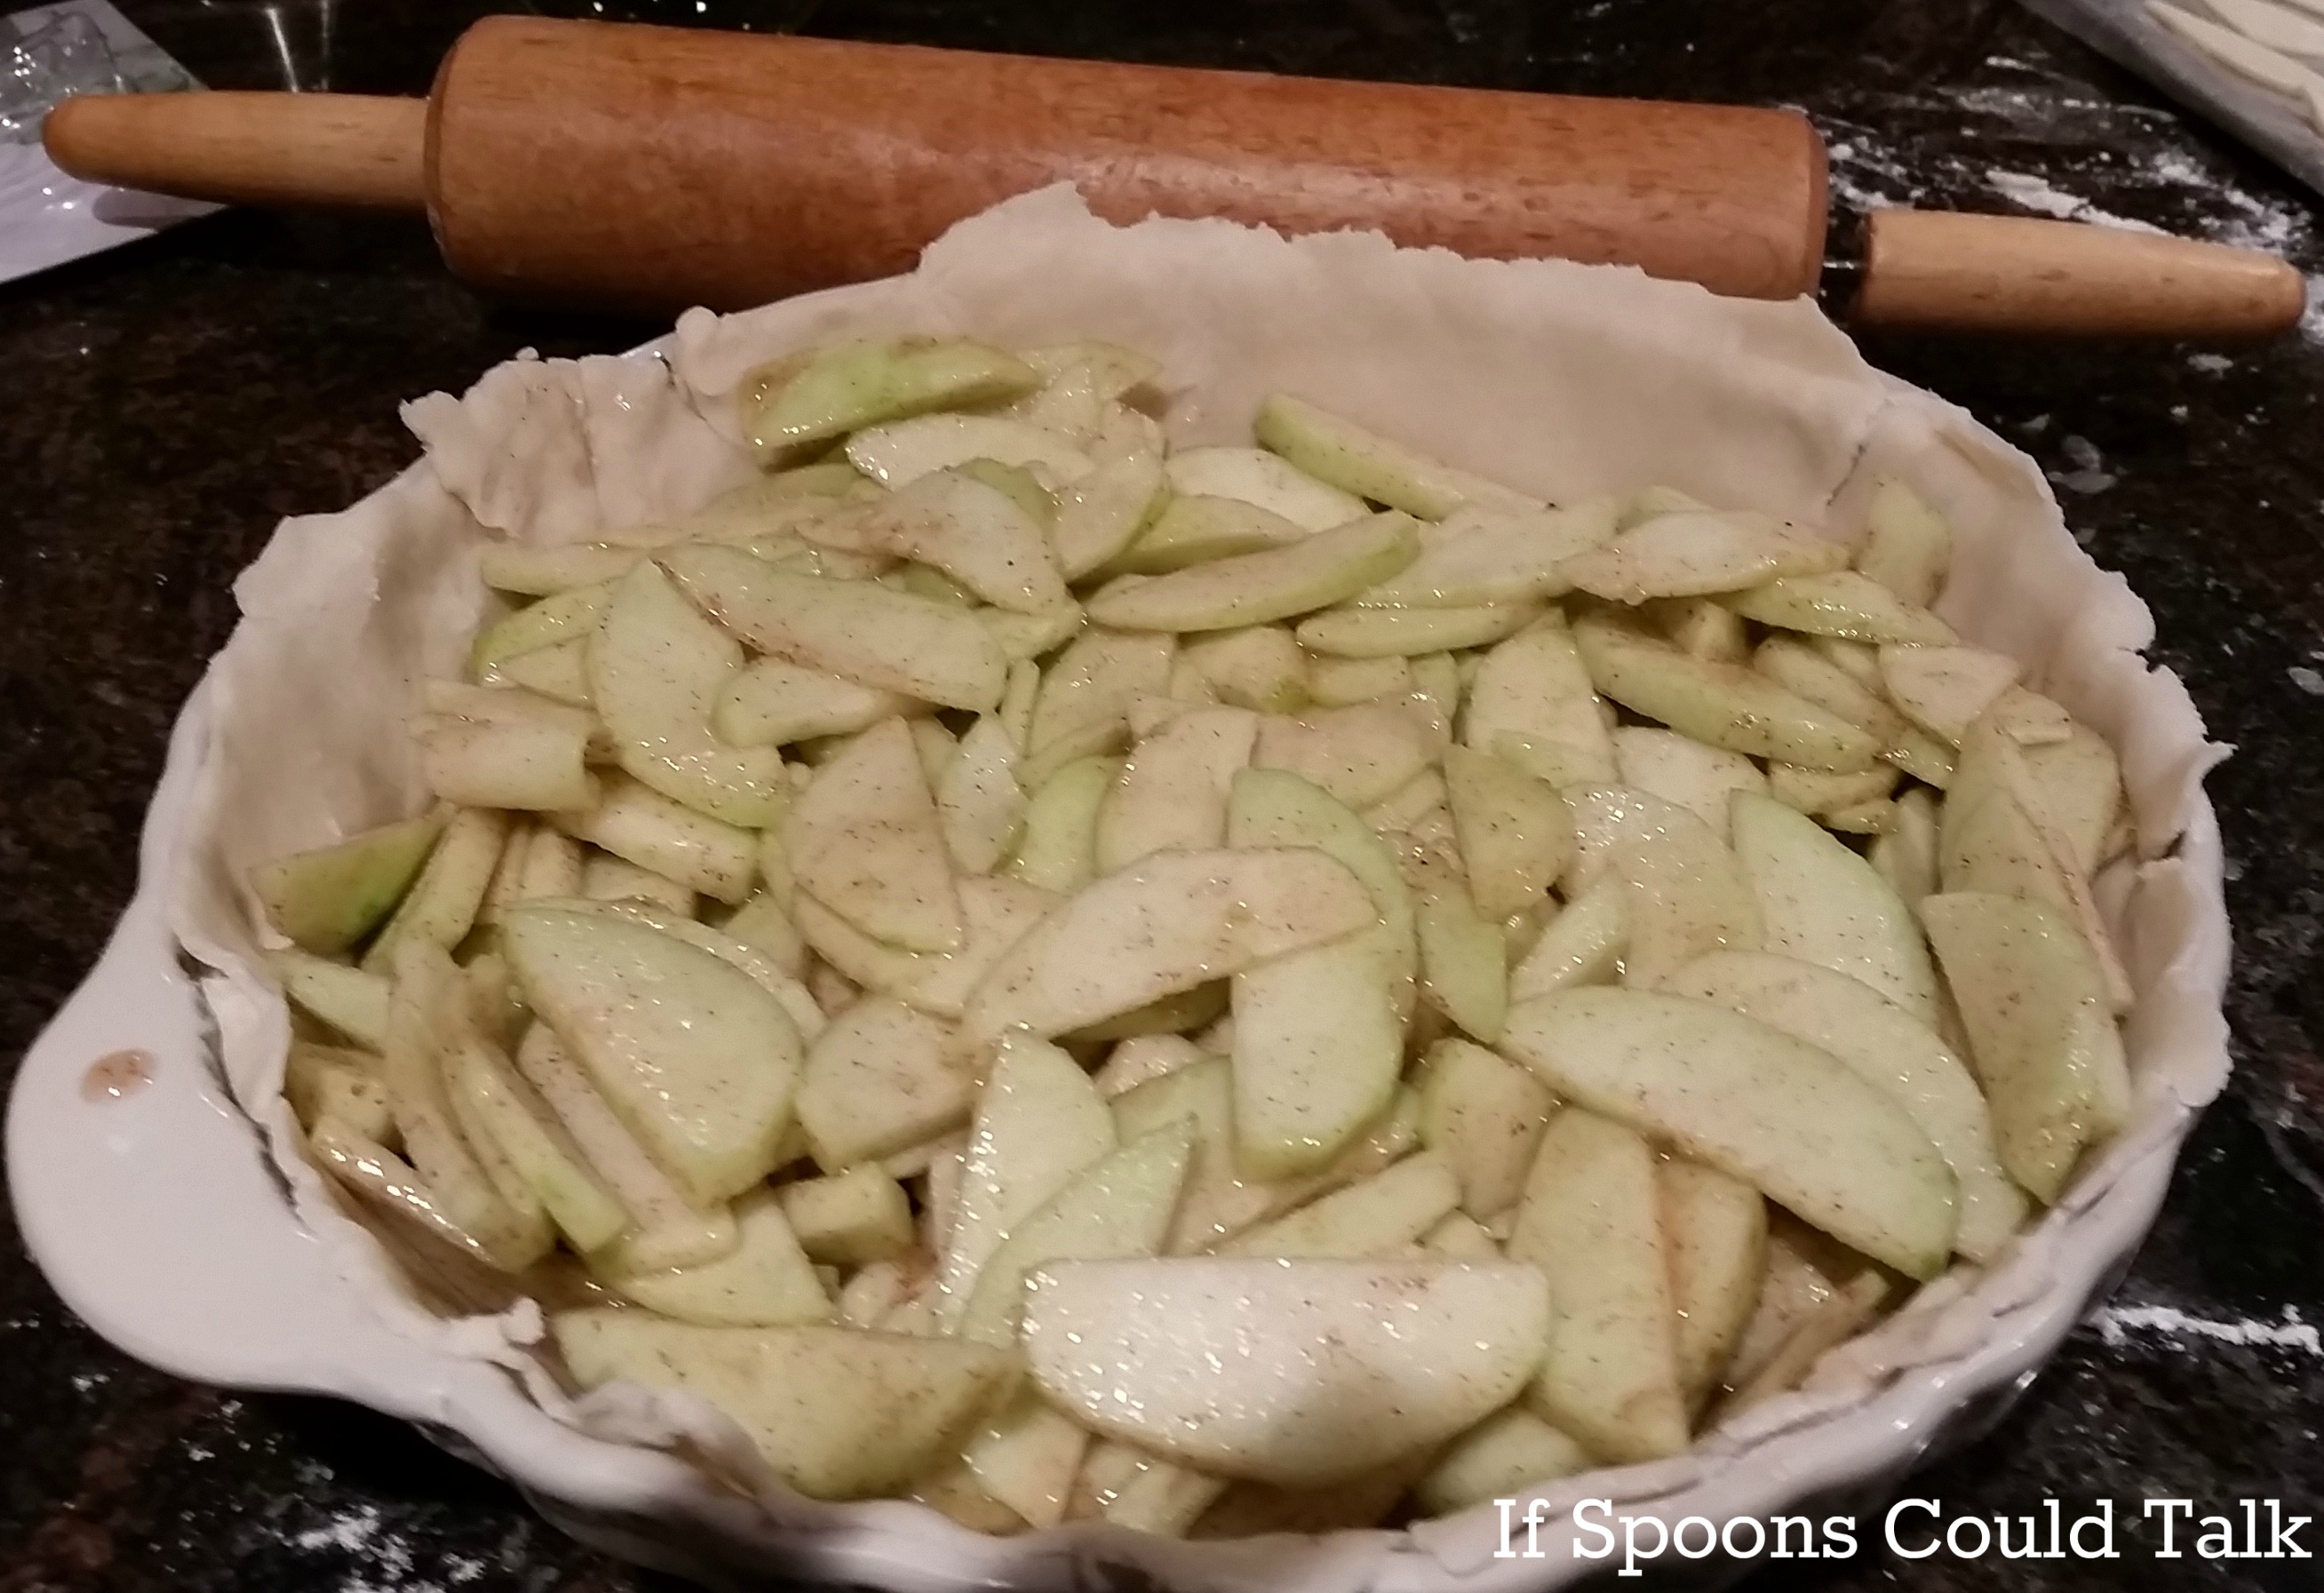 The smell of a homemade apple pie can take you to your happy place. This traditional apple pie is easy to make perfect for the holidays and weeknights alike.